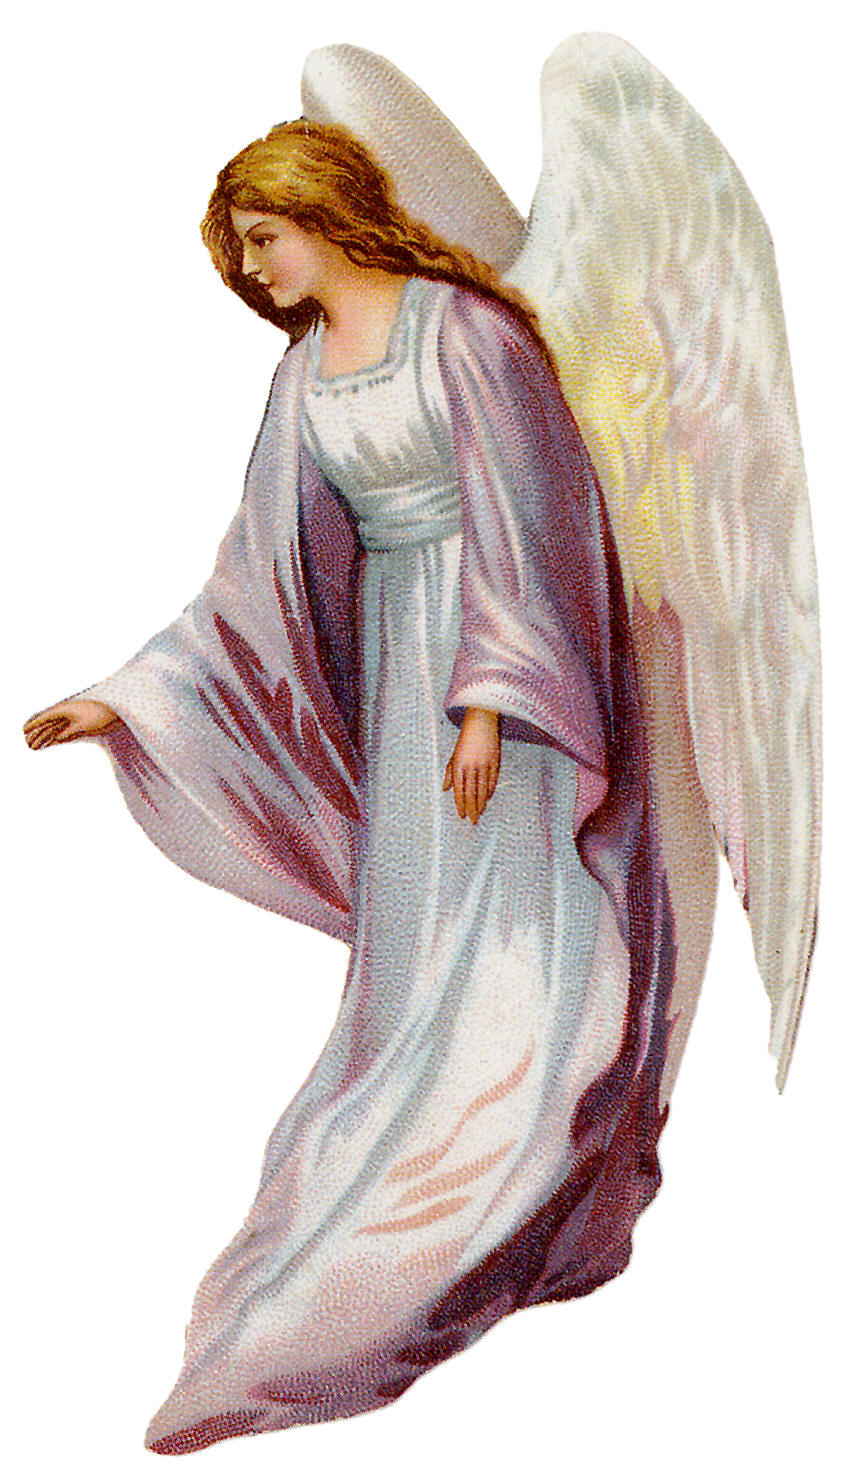 free guardian angel clipart - photo #13